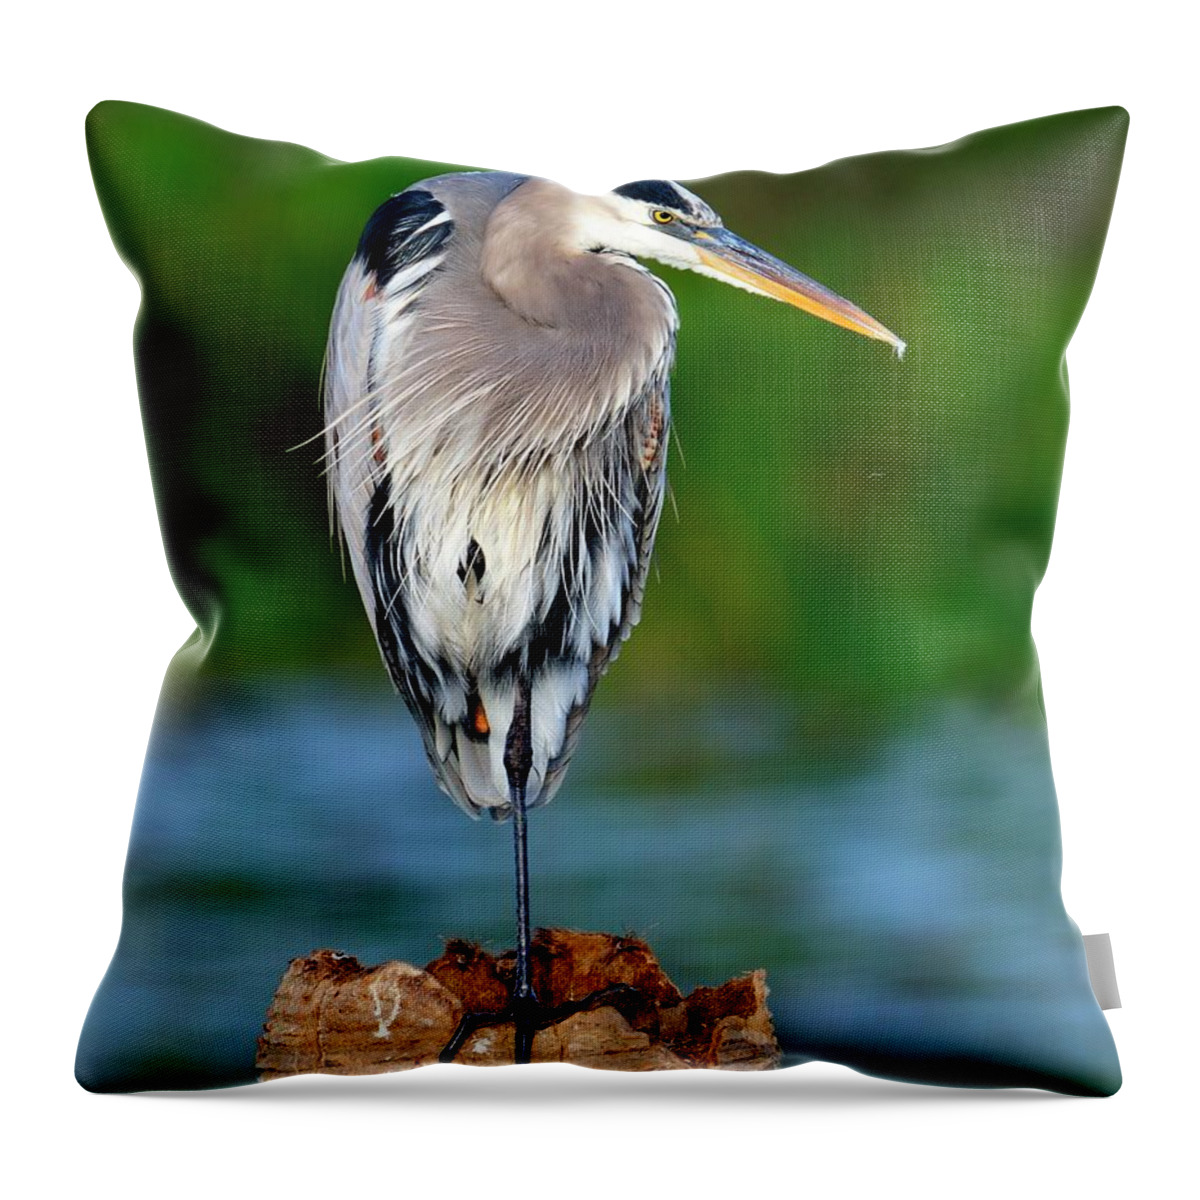 Heron Throw Pillow featuring the photograph Angry Bird by Bill Dodsworth